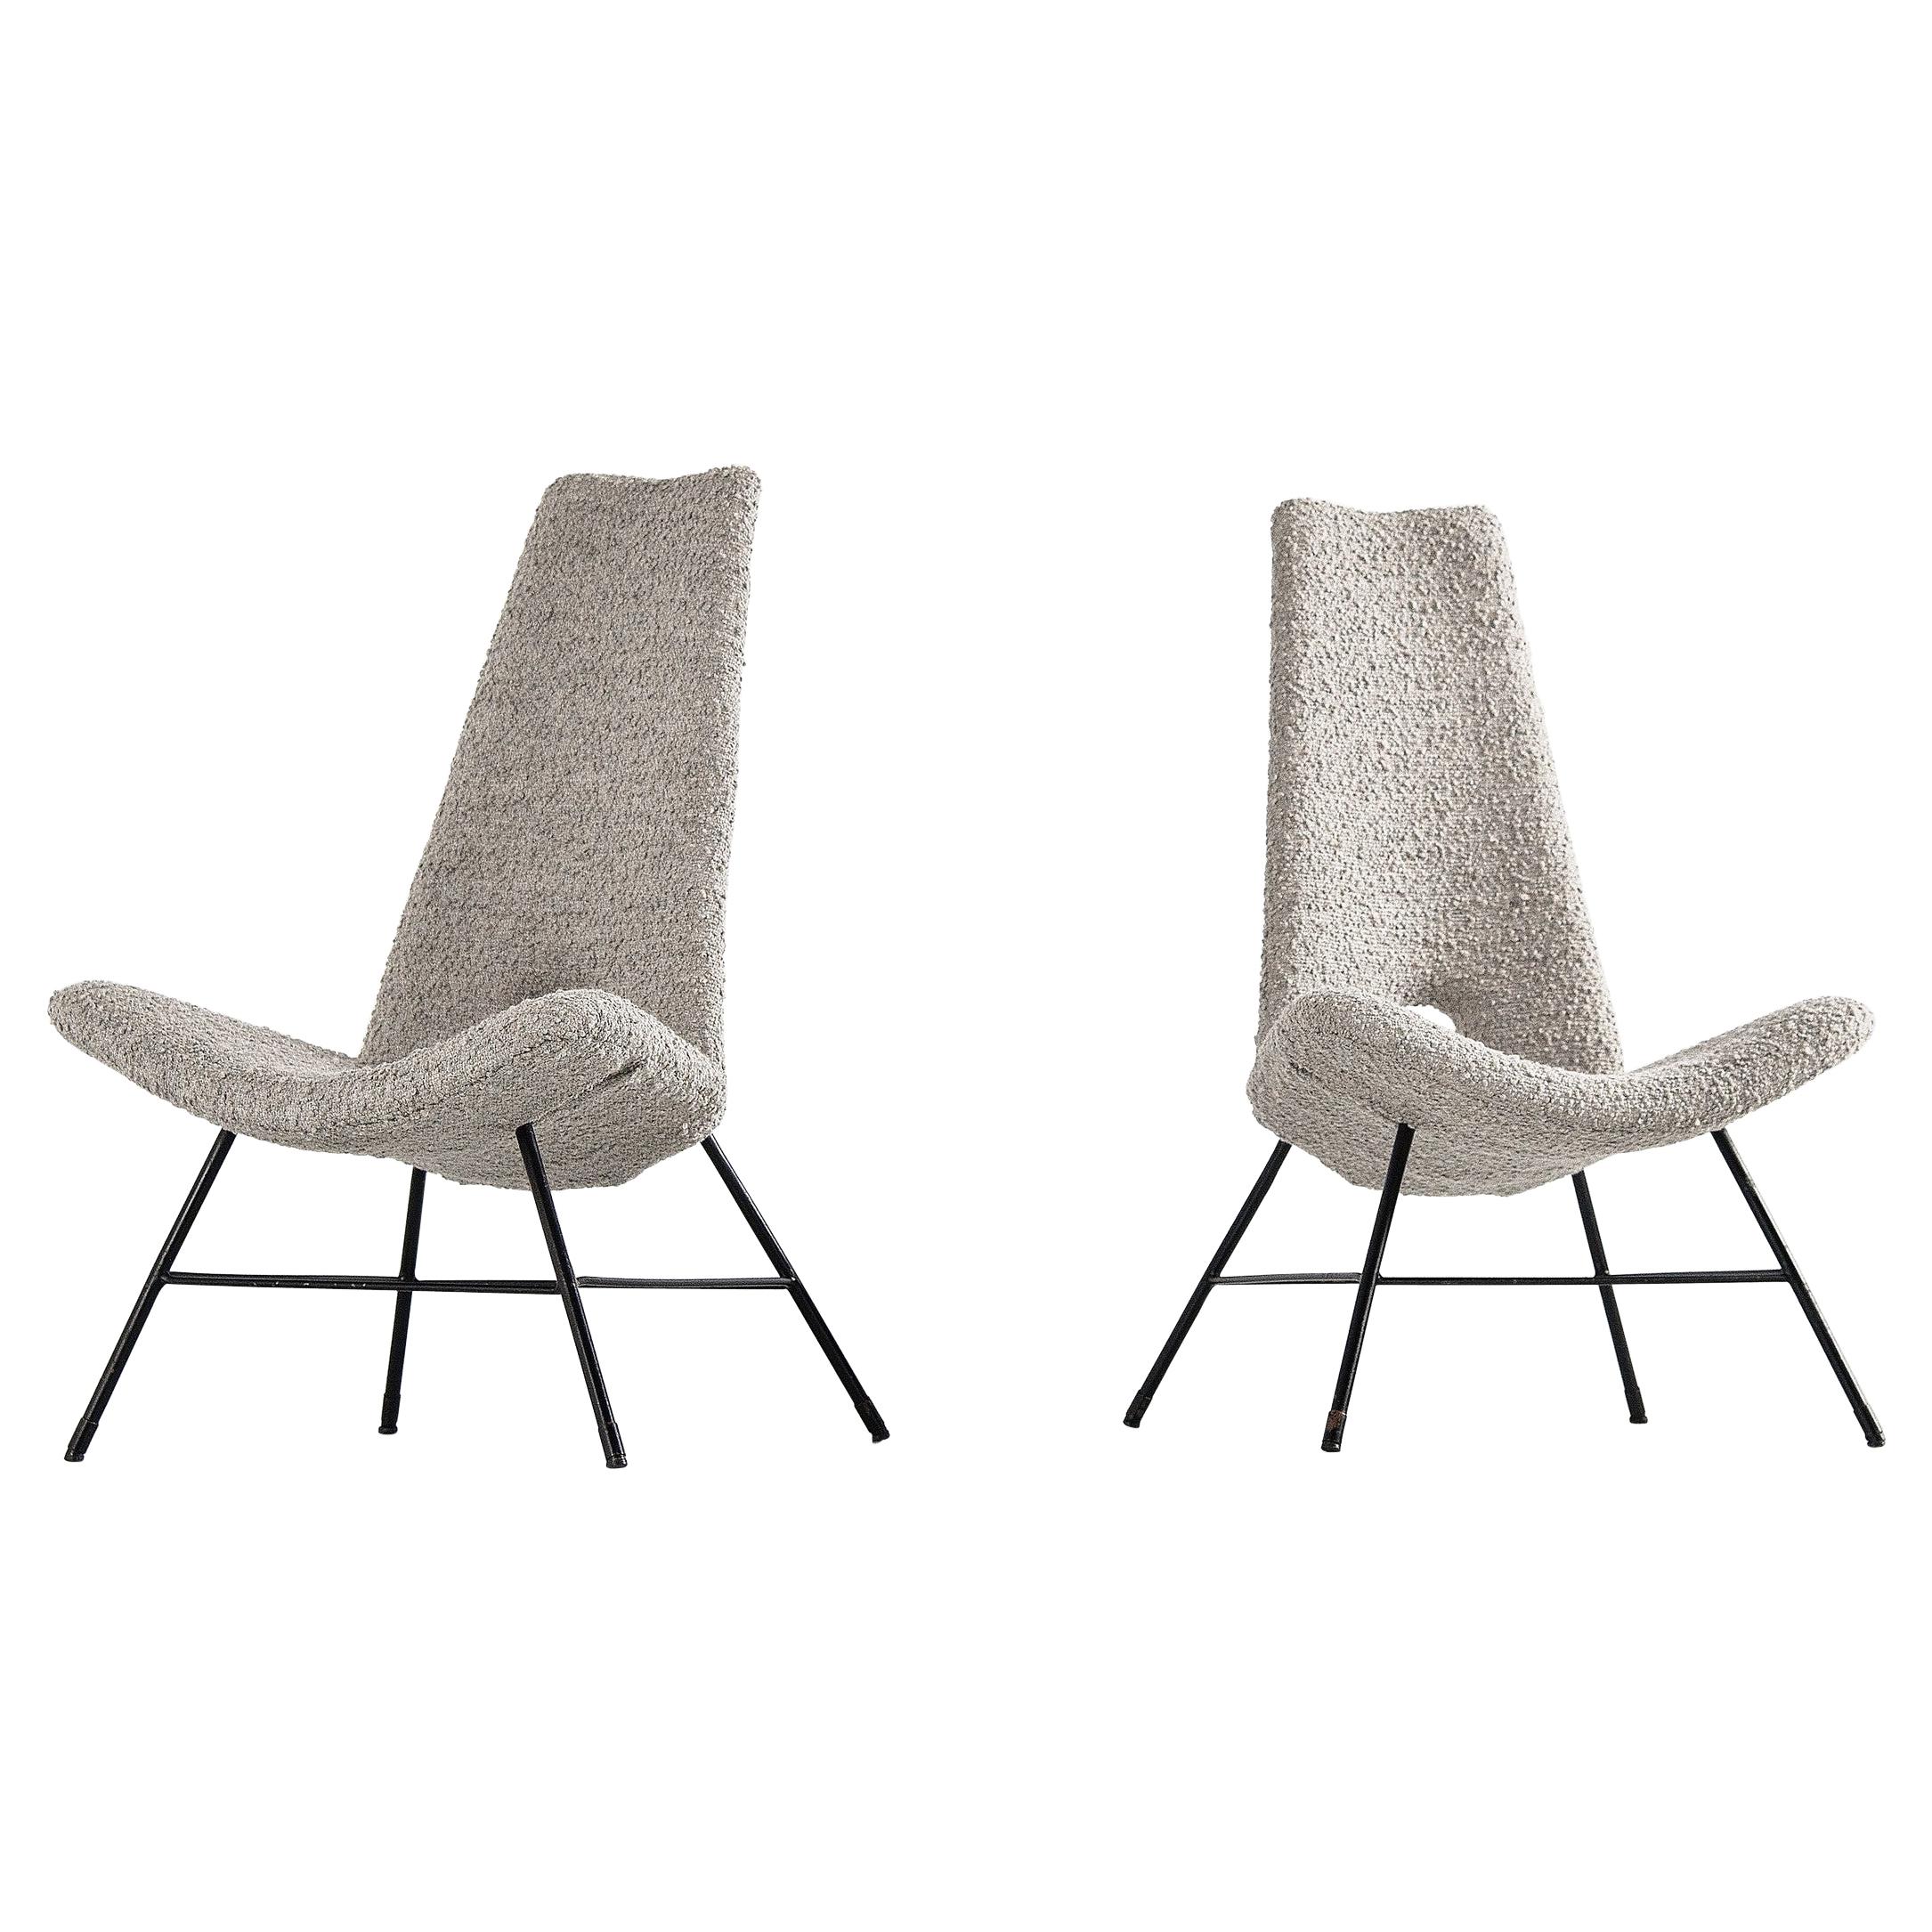 Sculptural Italian Lounge Chairs in Bouclé Fabric 1950